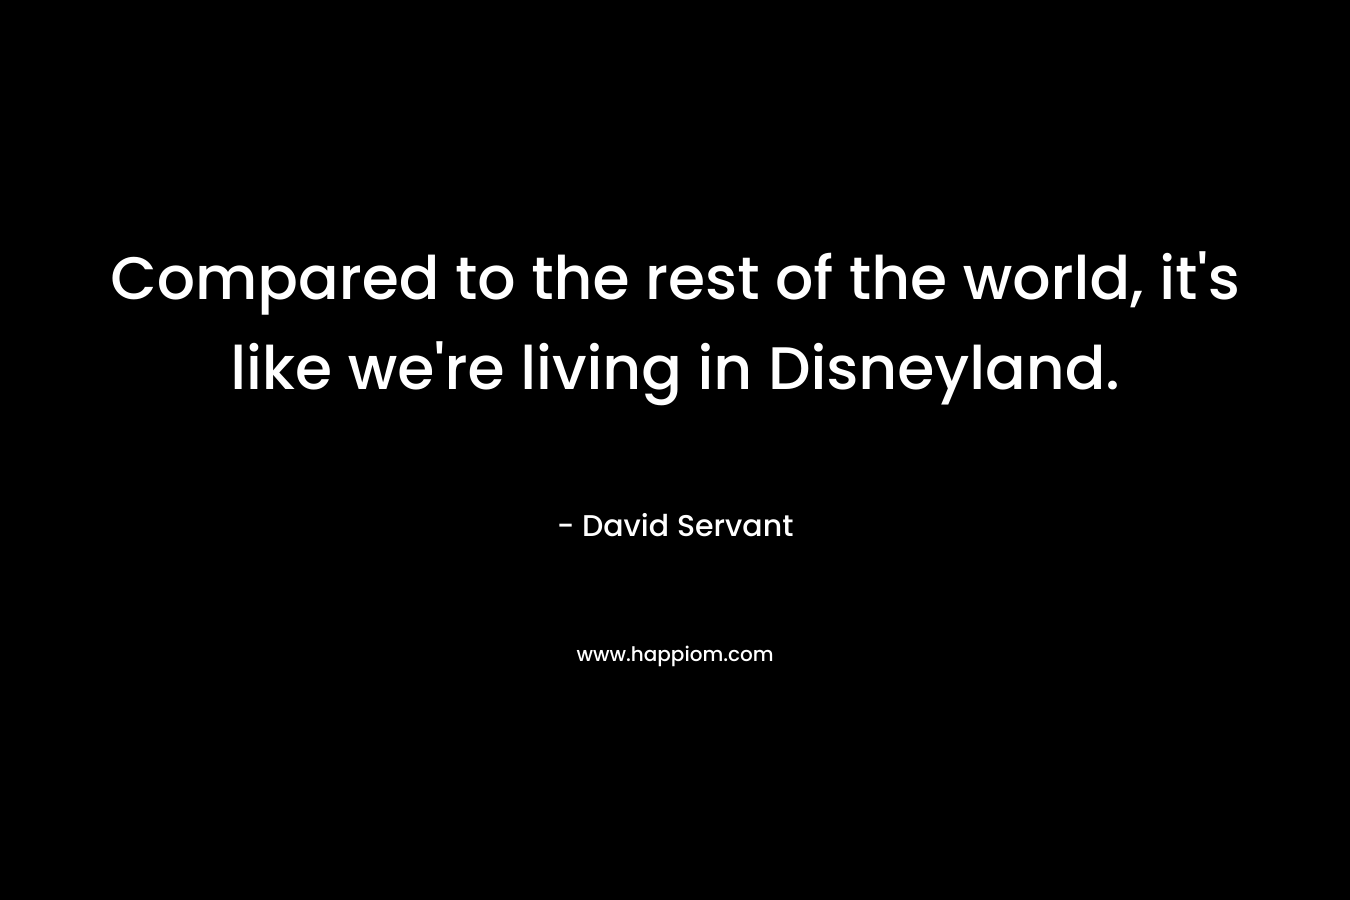 Compared to the rest of the world, it's like we're living in Disneyland.